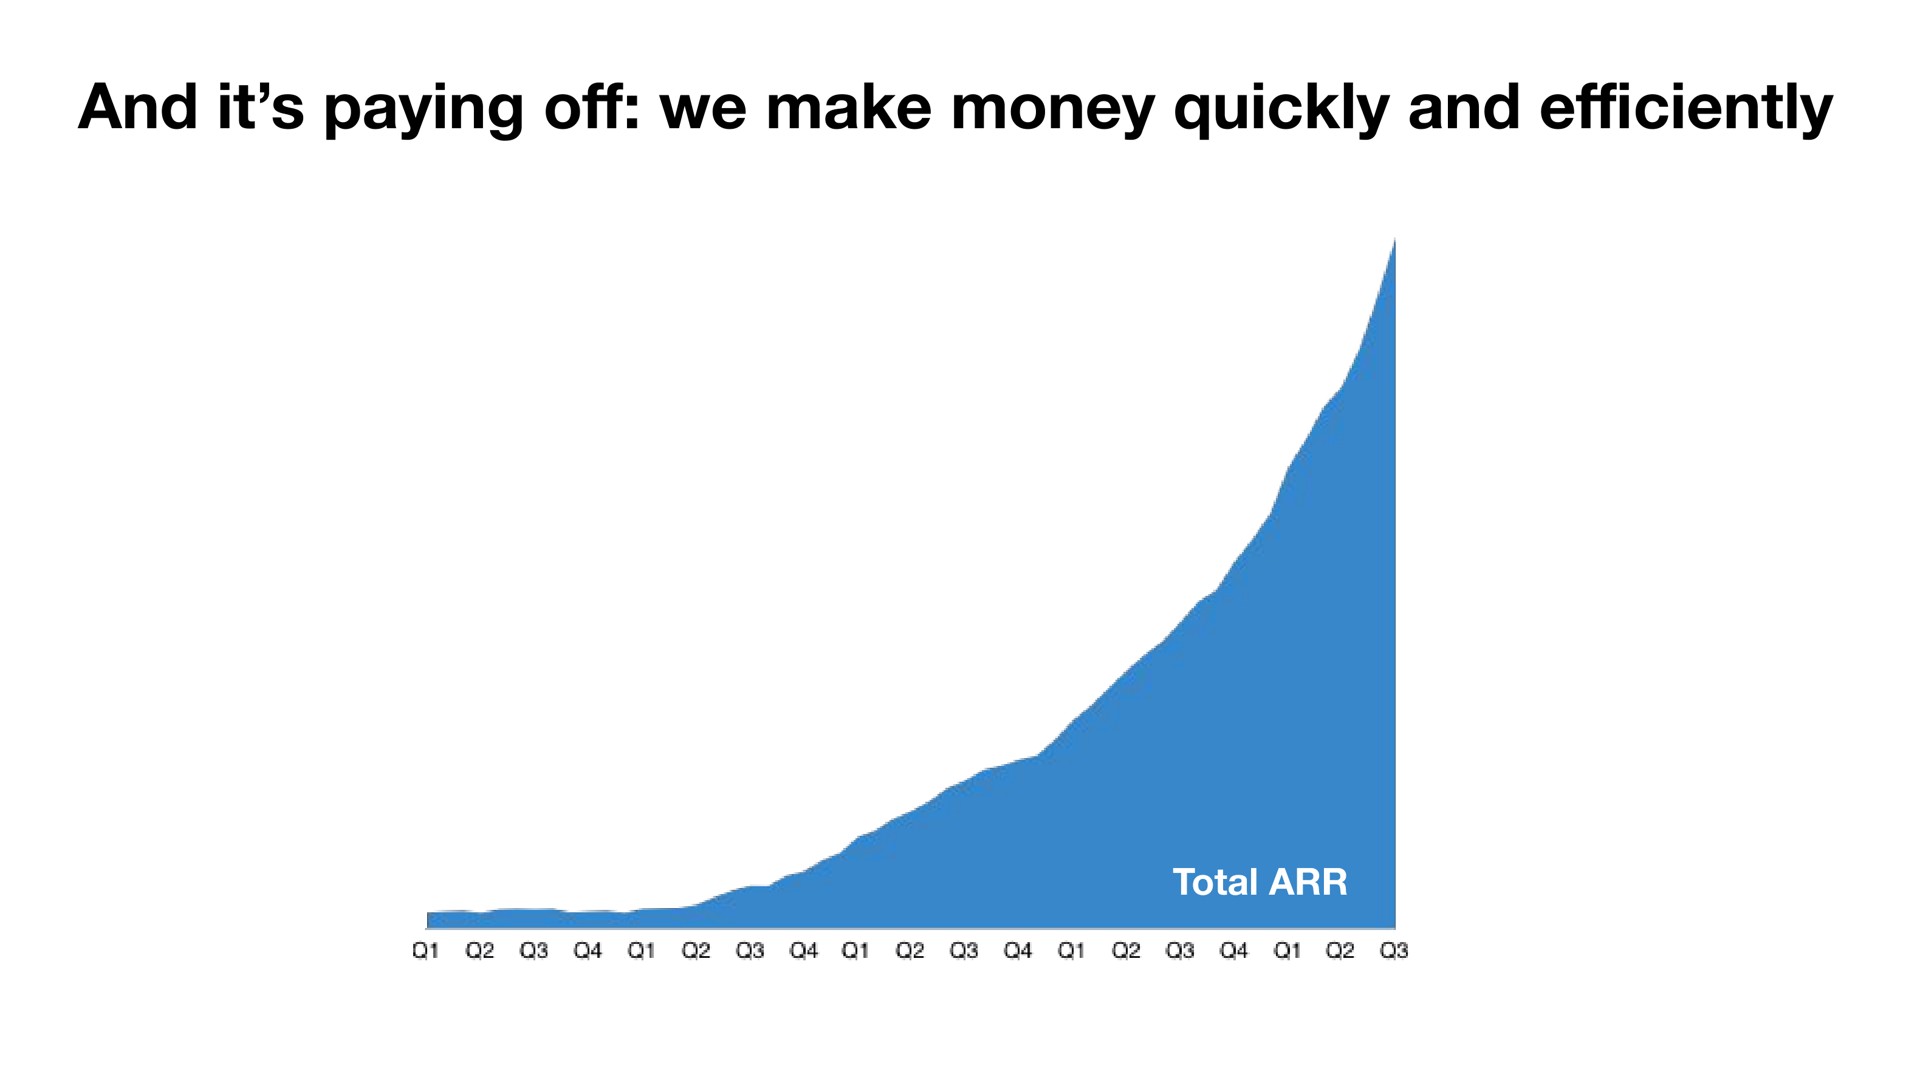 and it paying off we make money quickly and efficiently | Crunchbase